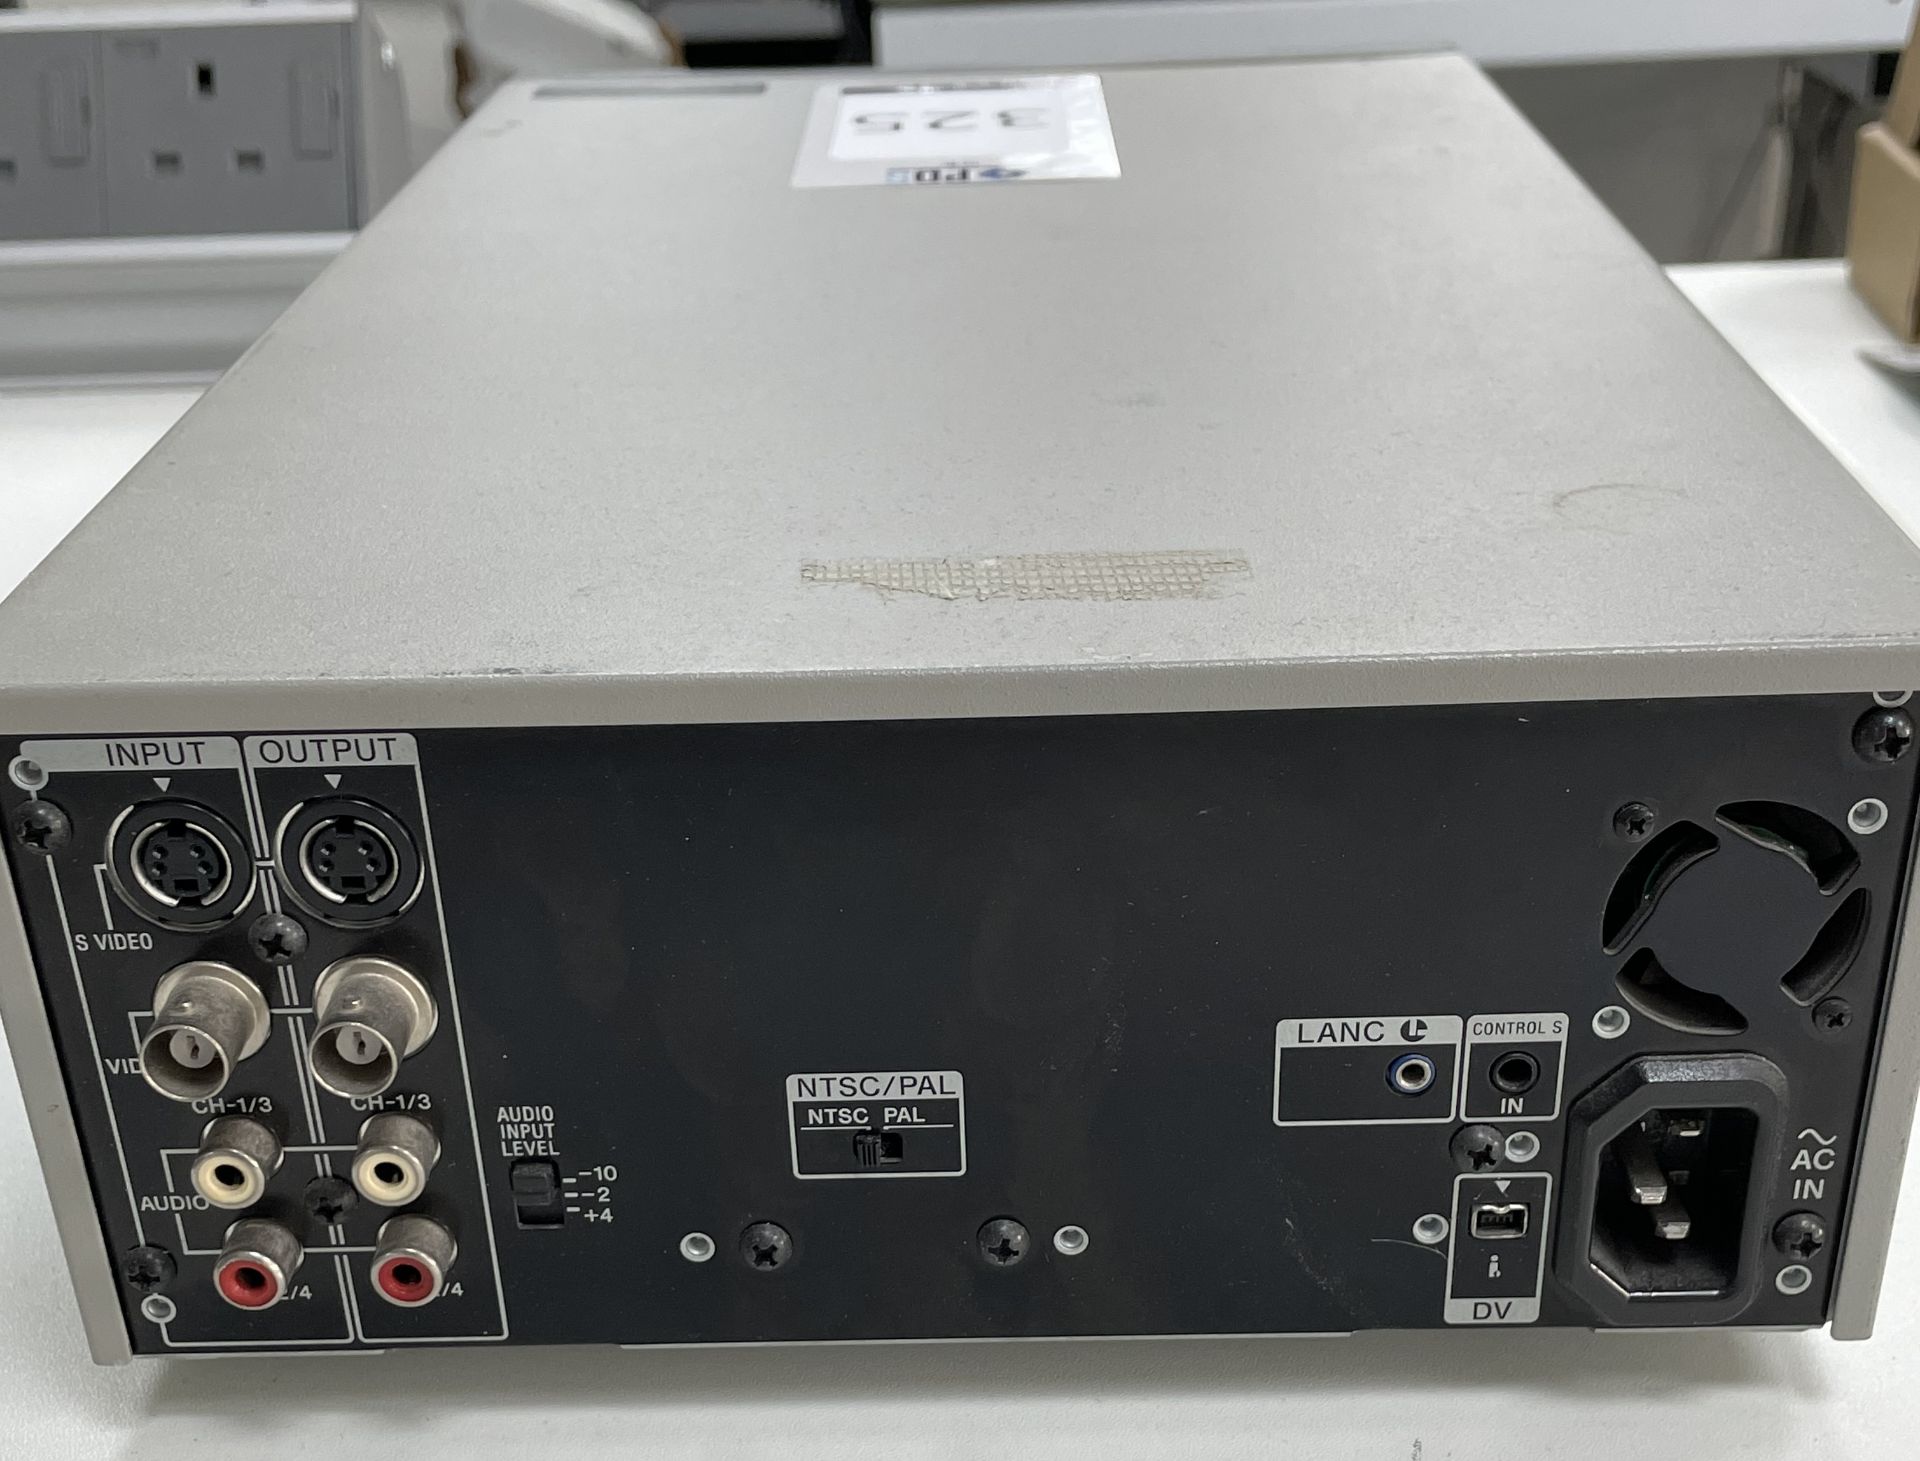 Sony DSR-25 DVCAM Recorder (Location: Westminster. Please Refer to General Notes) - Image 2 of 3